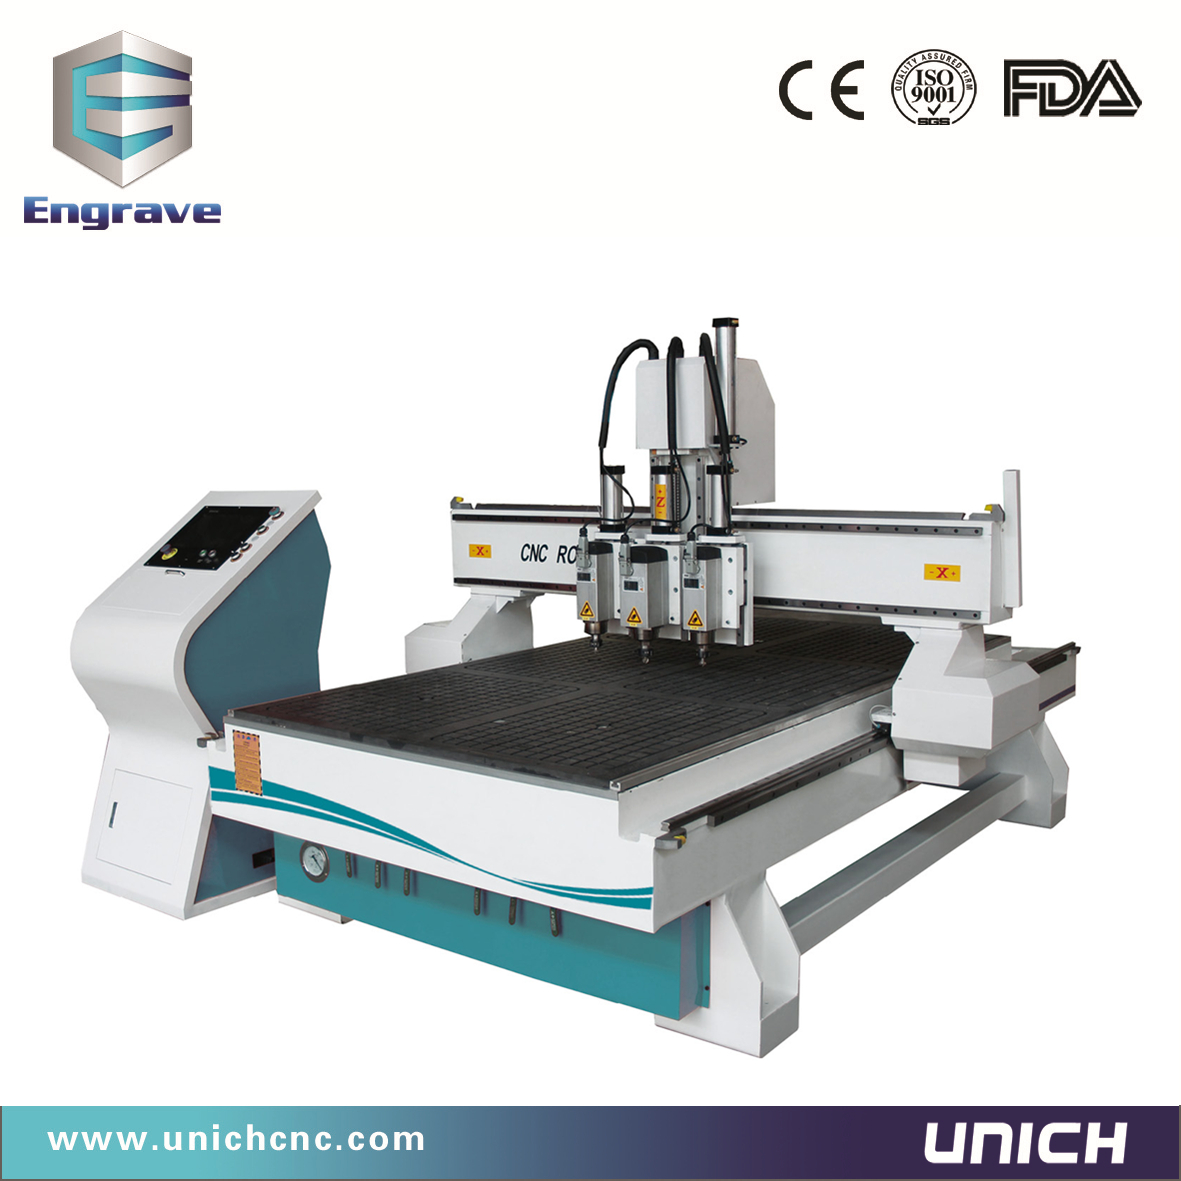 1300x2500mm working area Three head cnc router